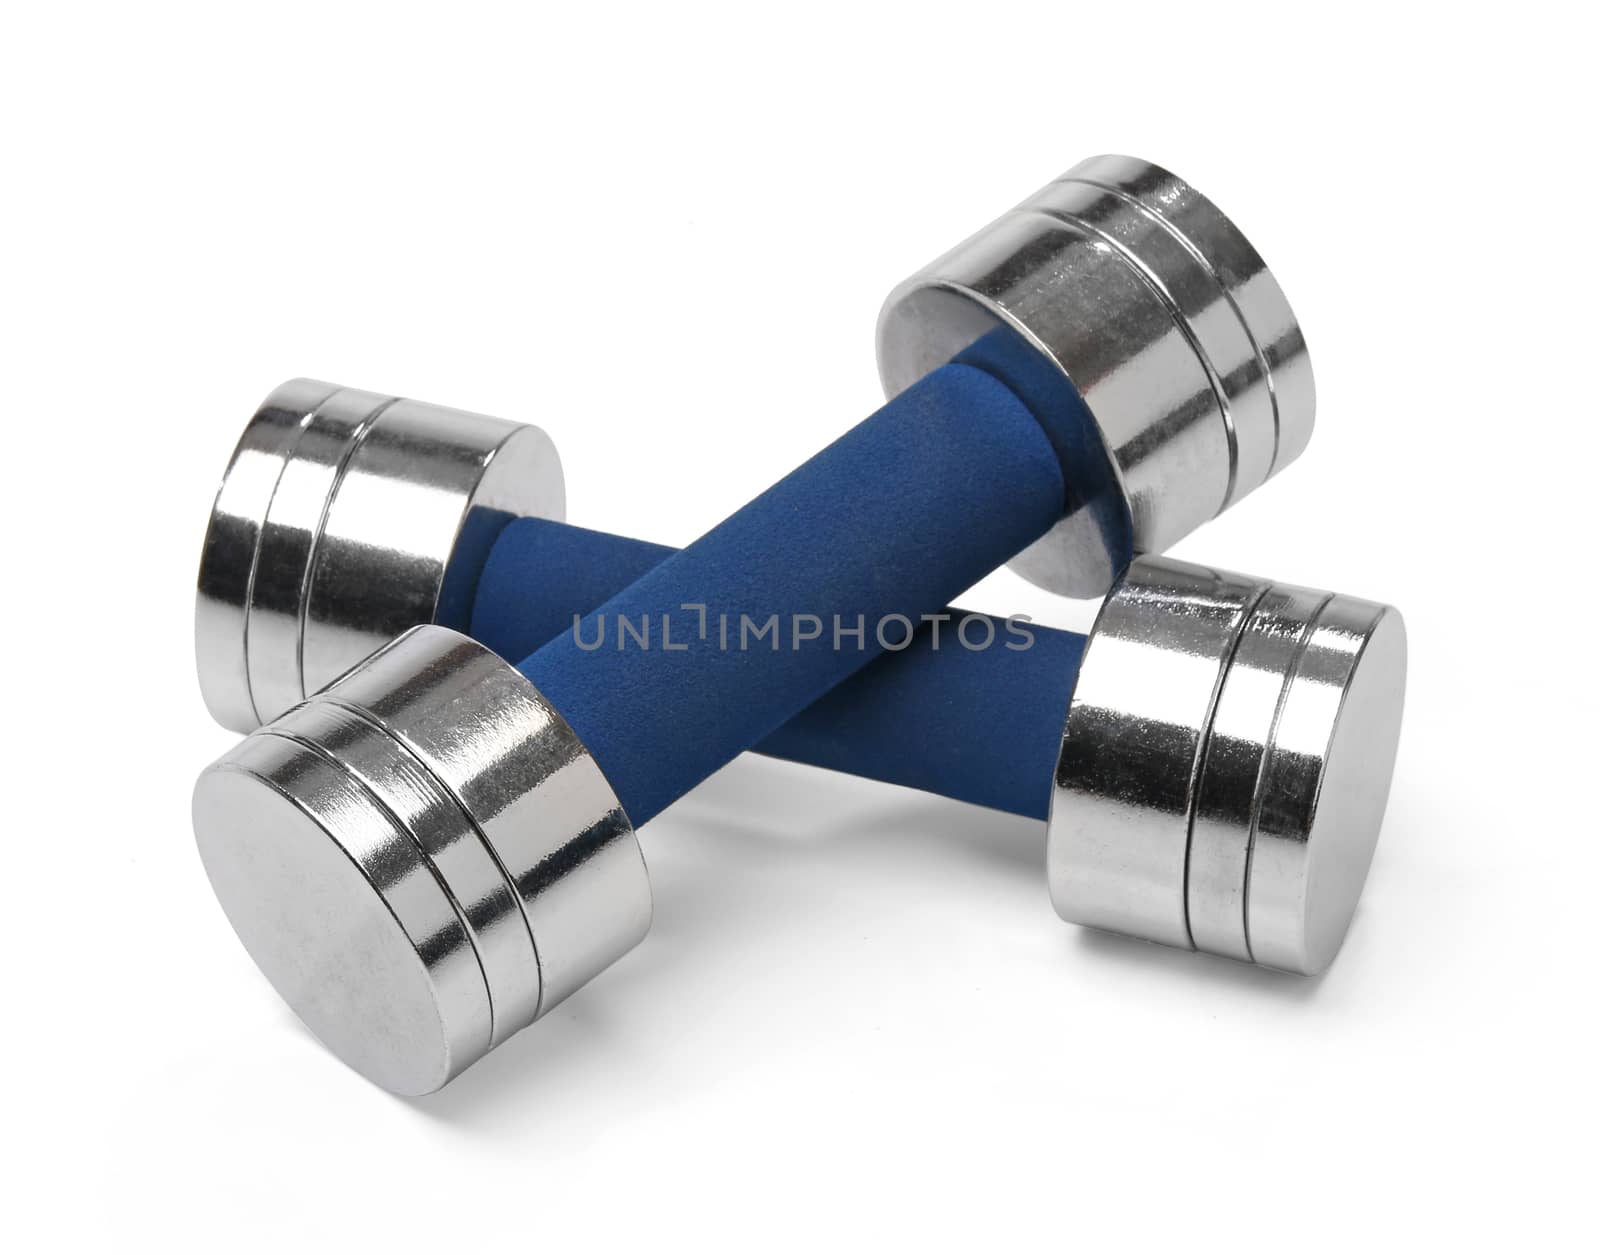 Pair of dumbbells isolated over white background